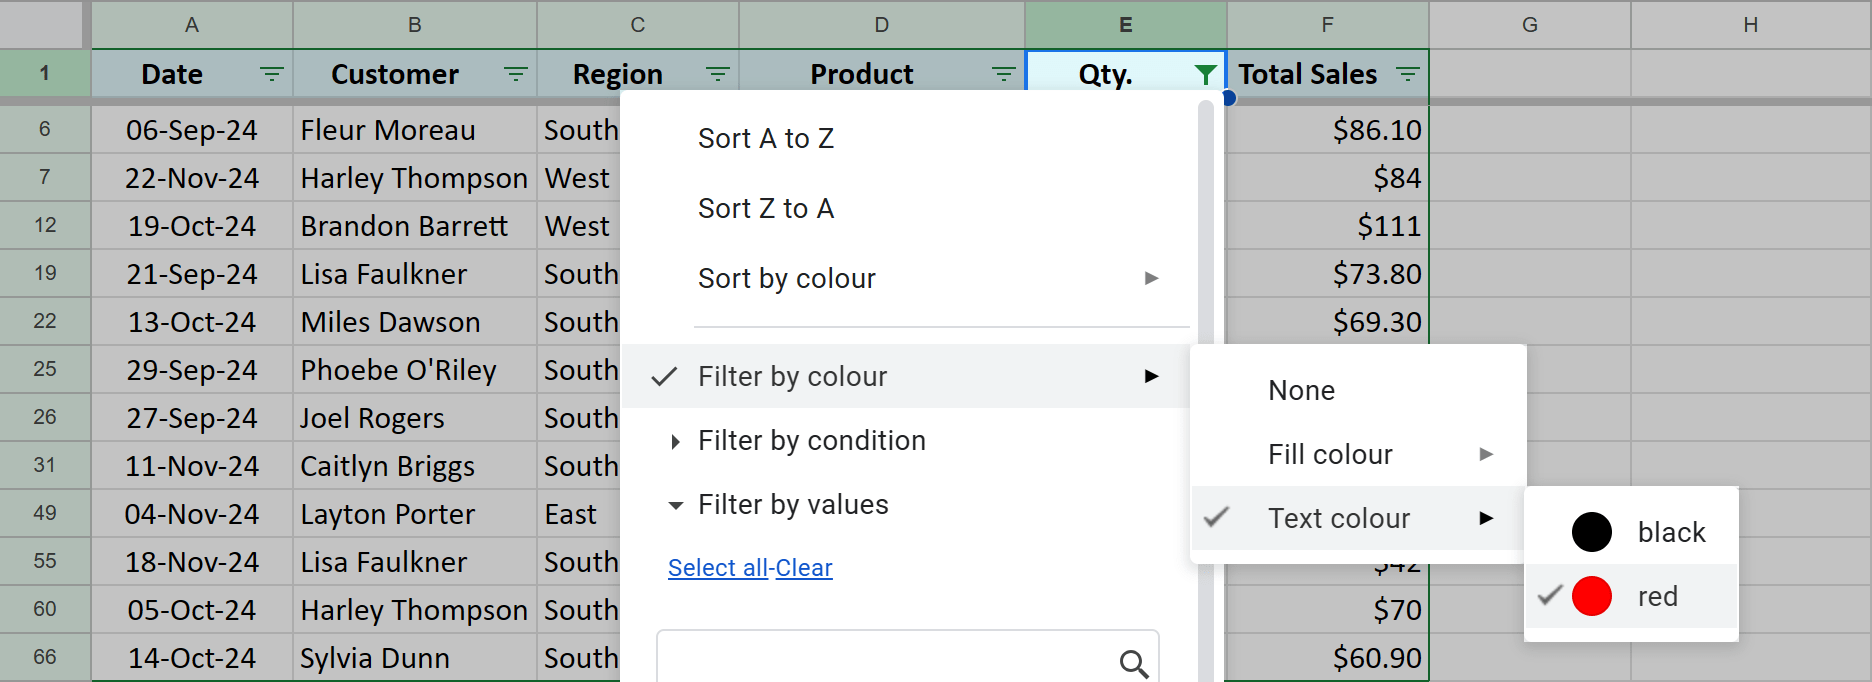 Filter Google Sheets by red text color.